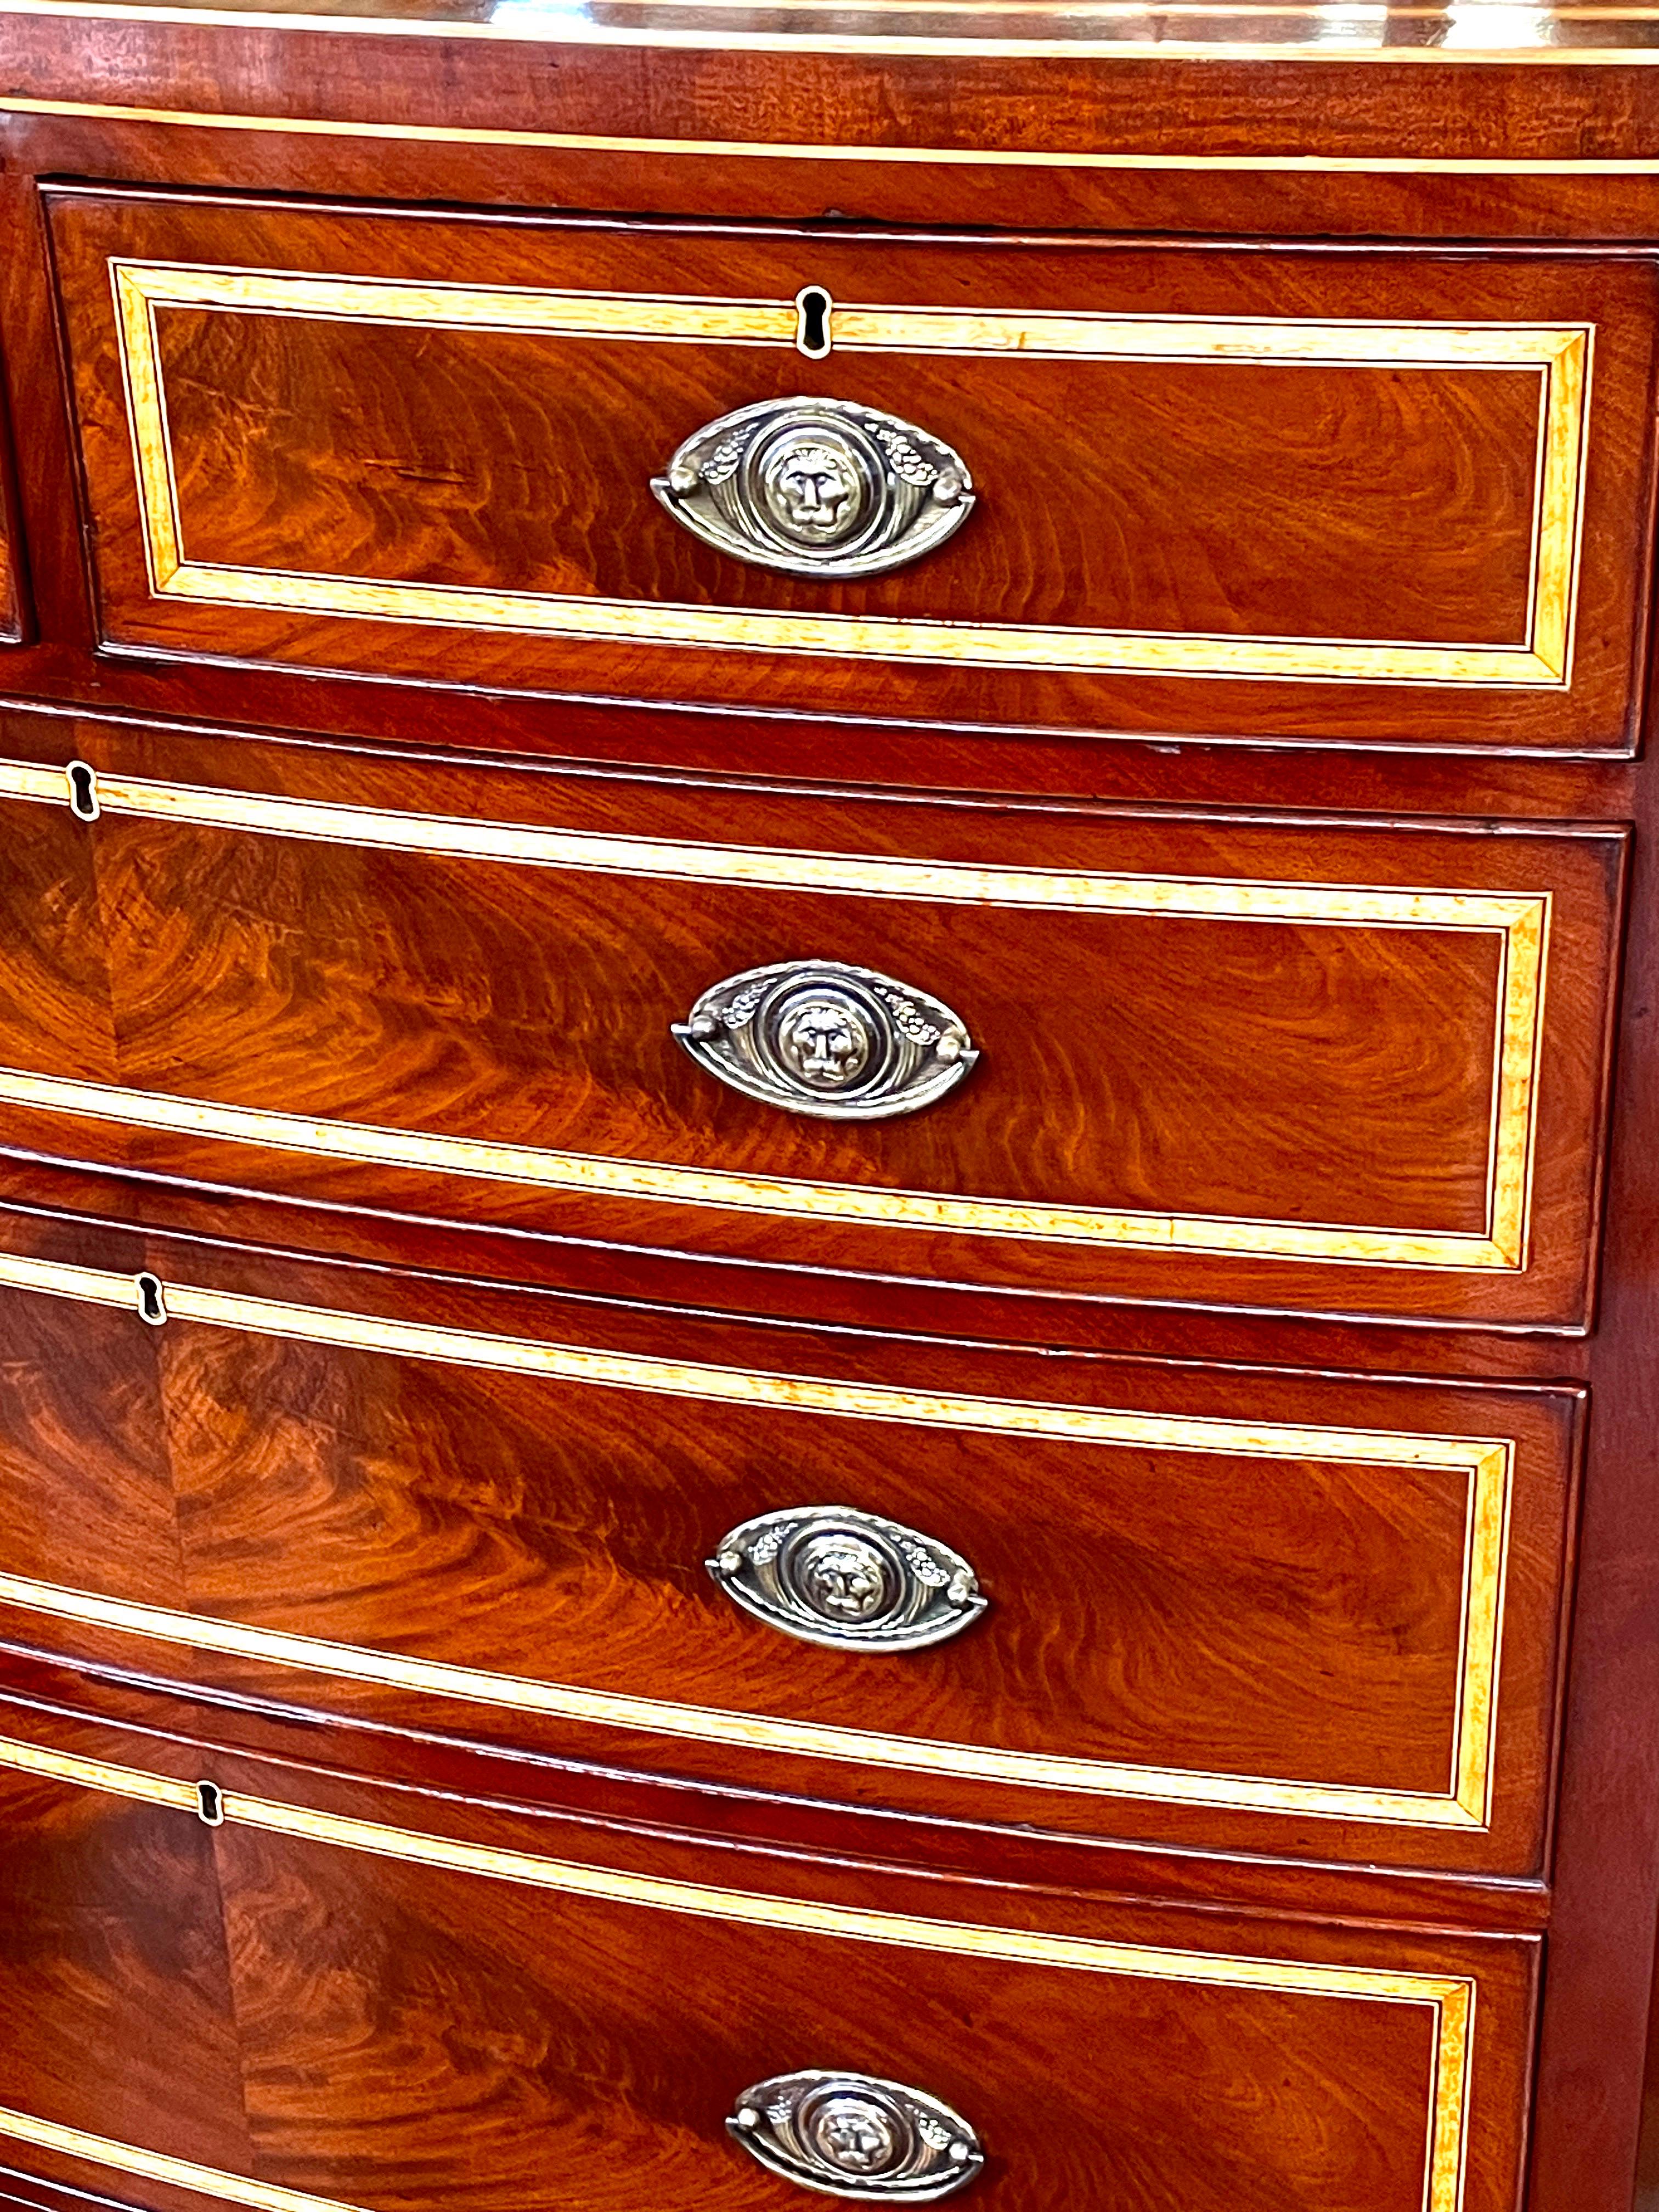 A magnificent and useful Large Antique English Geo. IV period Hepplewhite style satinwood and rosewood inlaid bookmatched flame or crotch mahogany Bowfront two short over three long drawers with handsome oval brasses (likely later replacements but